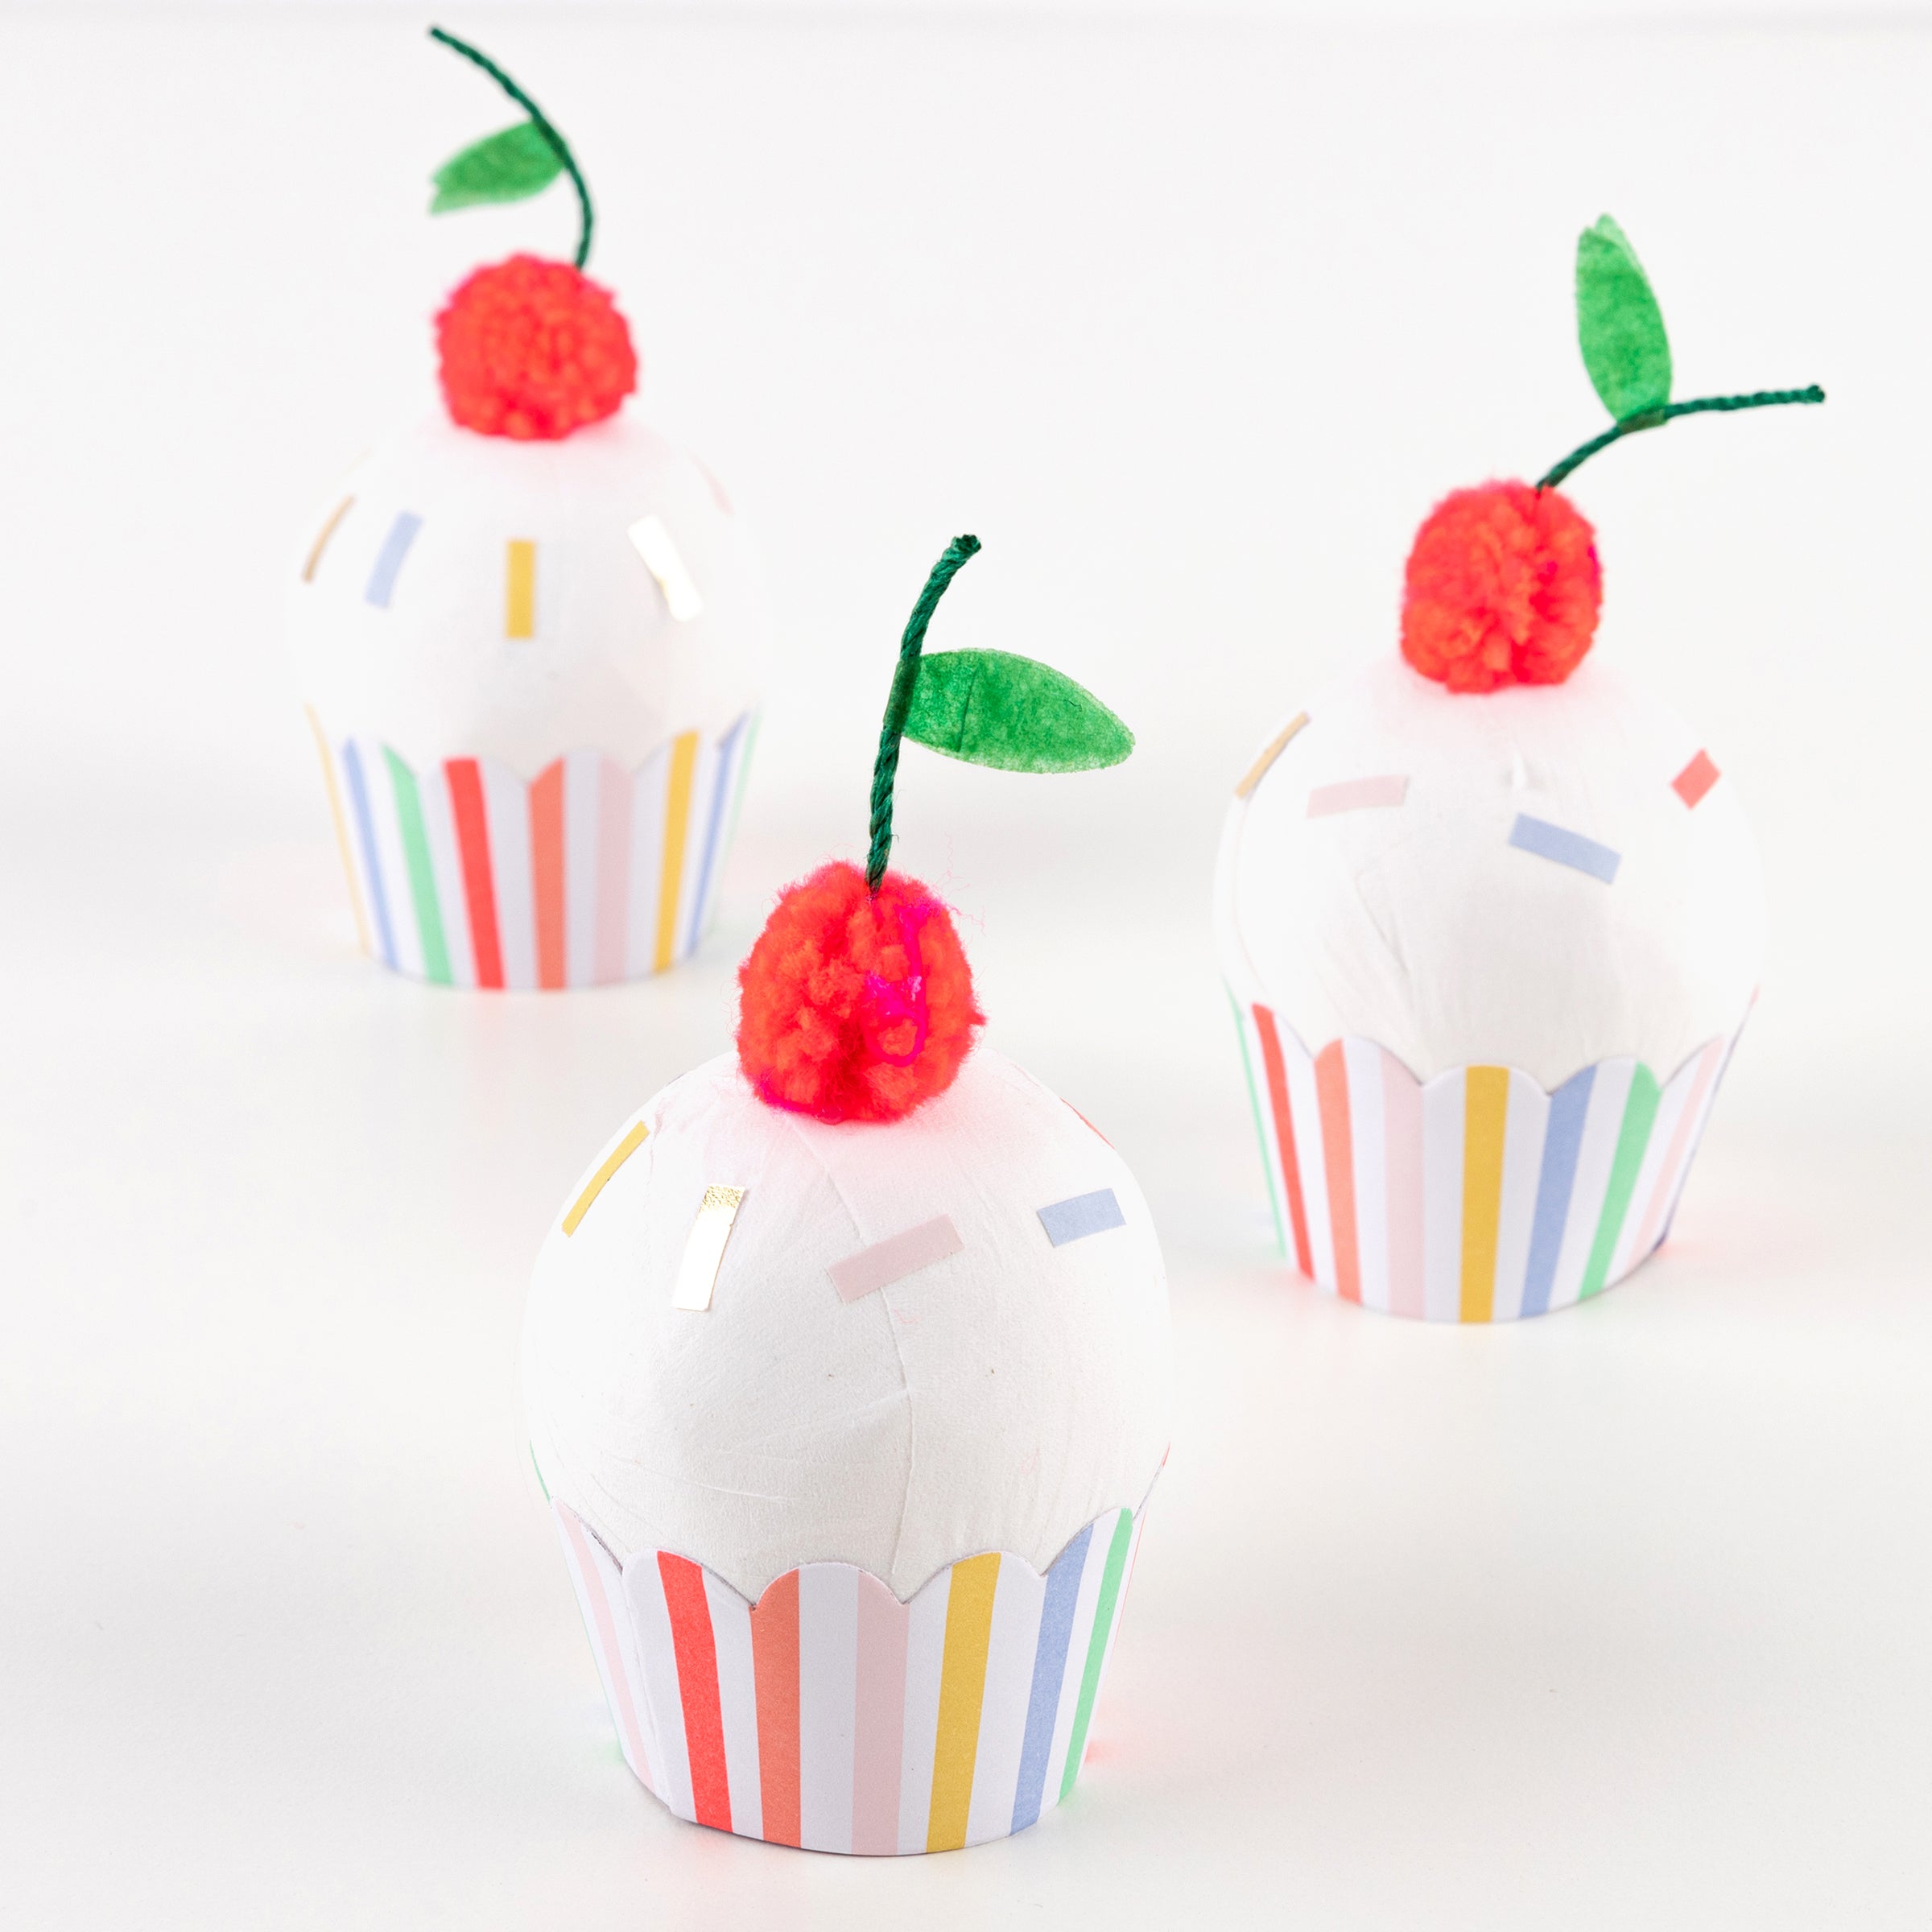 This party favours are cleverly crafted to look like cupcakes, and contain temporary tattoos for kids and friendship bracelets.